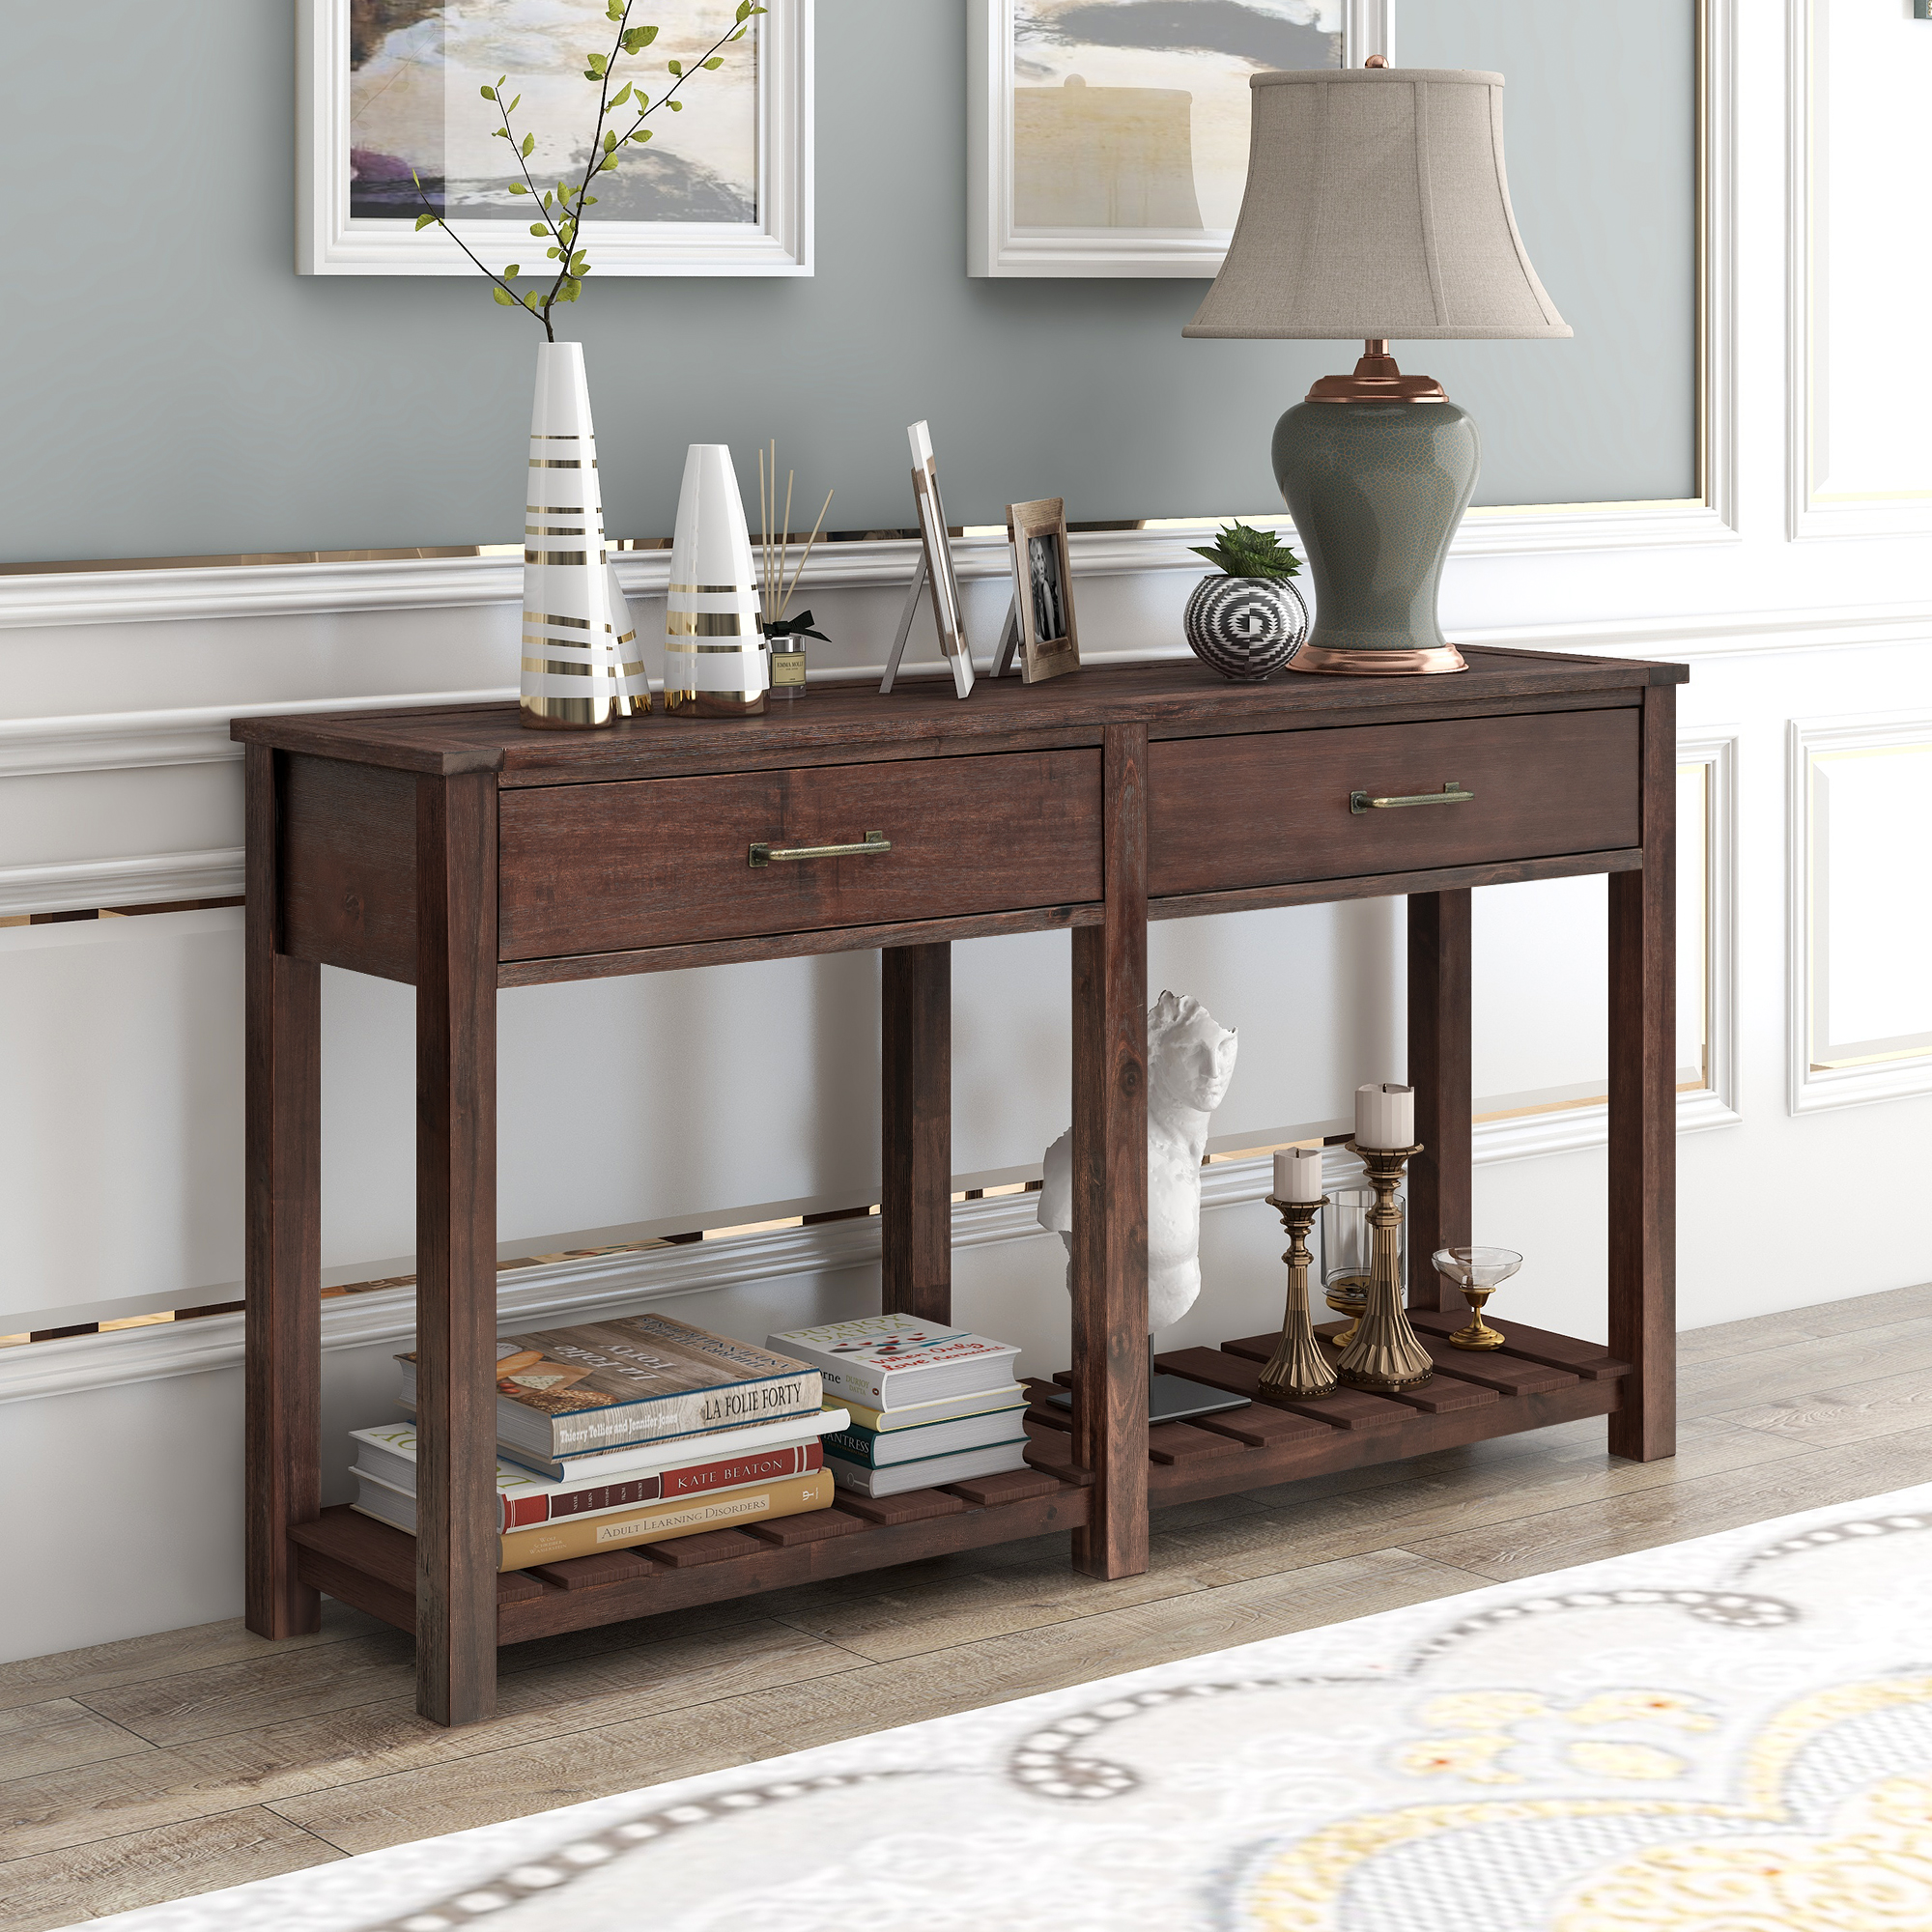 Classic Solid Console Table with 2 Drawers and Slatted Shelf, Entryway Table with Storage, Living Room, Hallway (Espresso)-Boyel Living